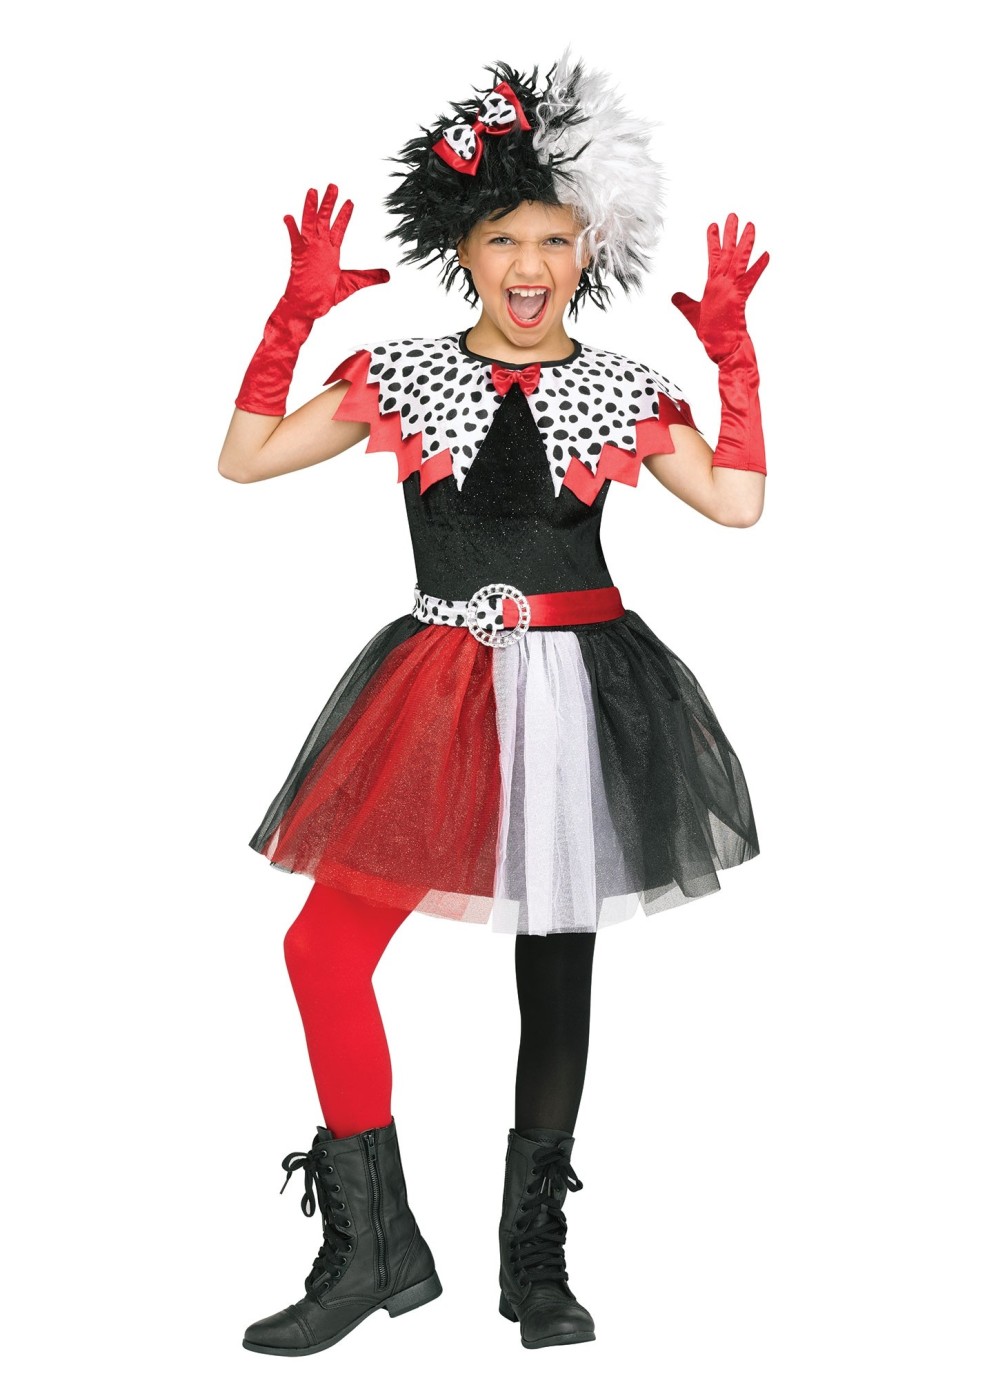 The Best Deals Guaranteed Spotted Villain Girl Costume United States